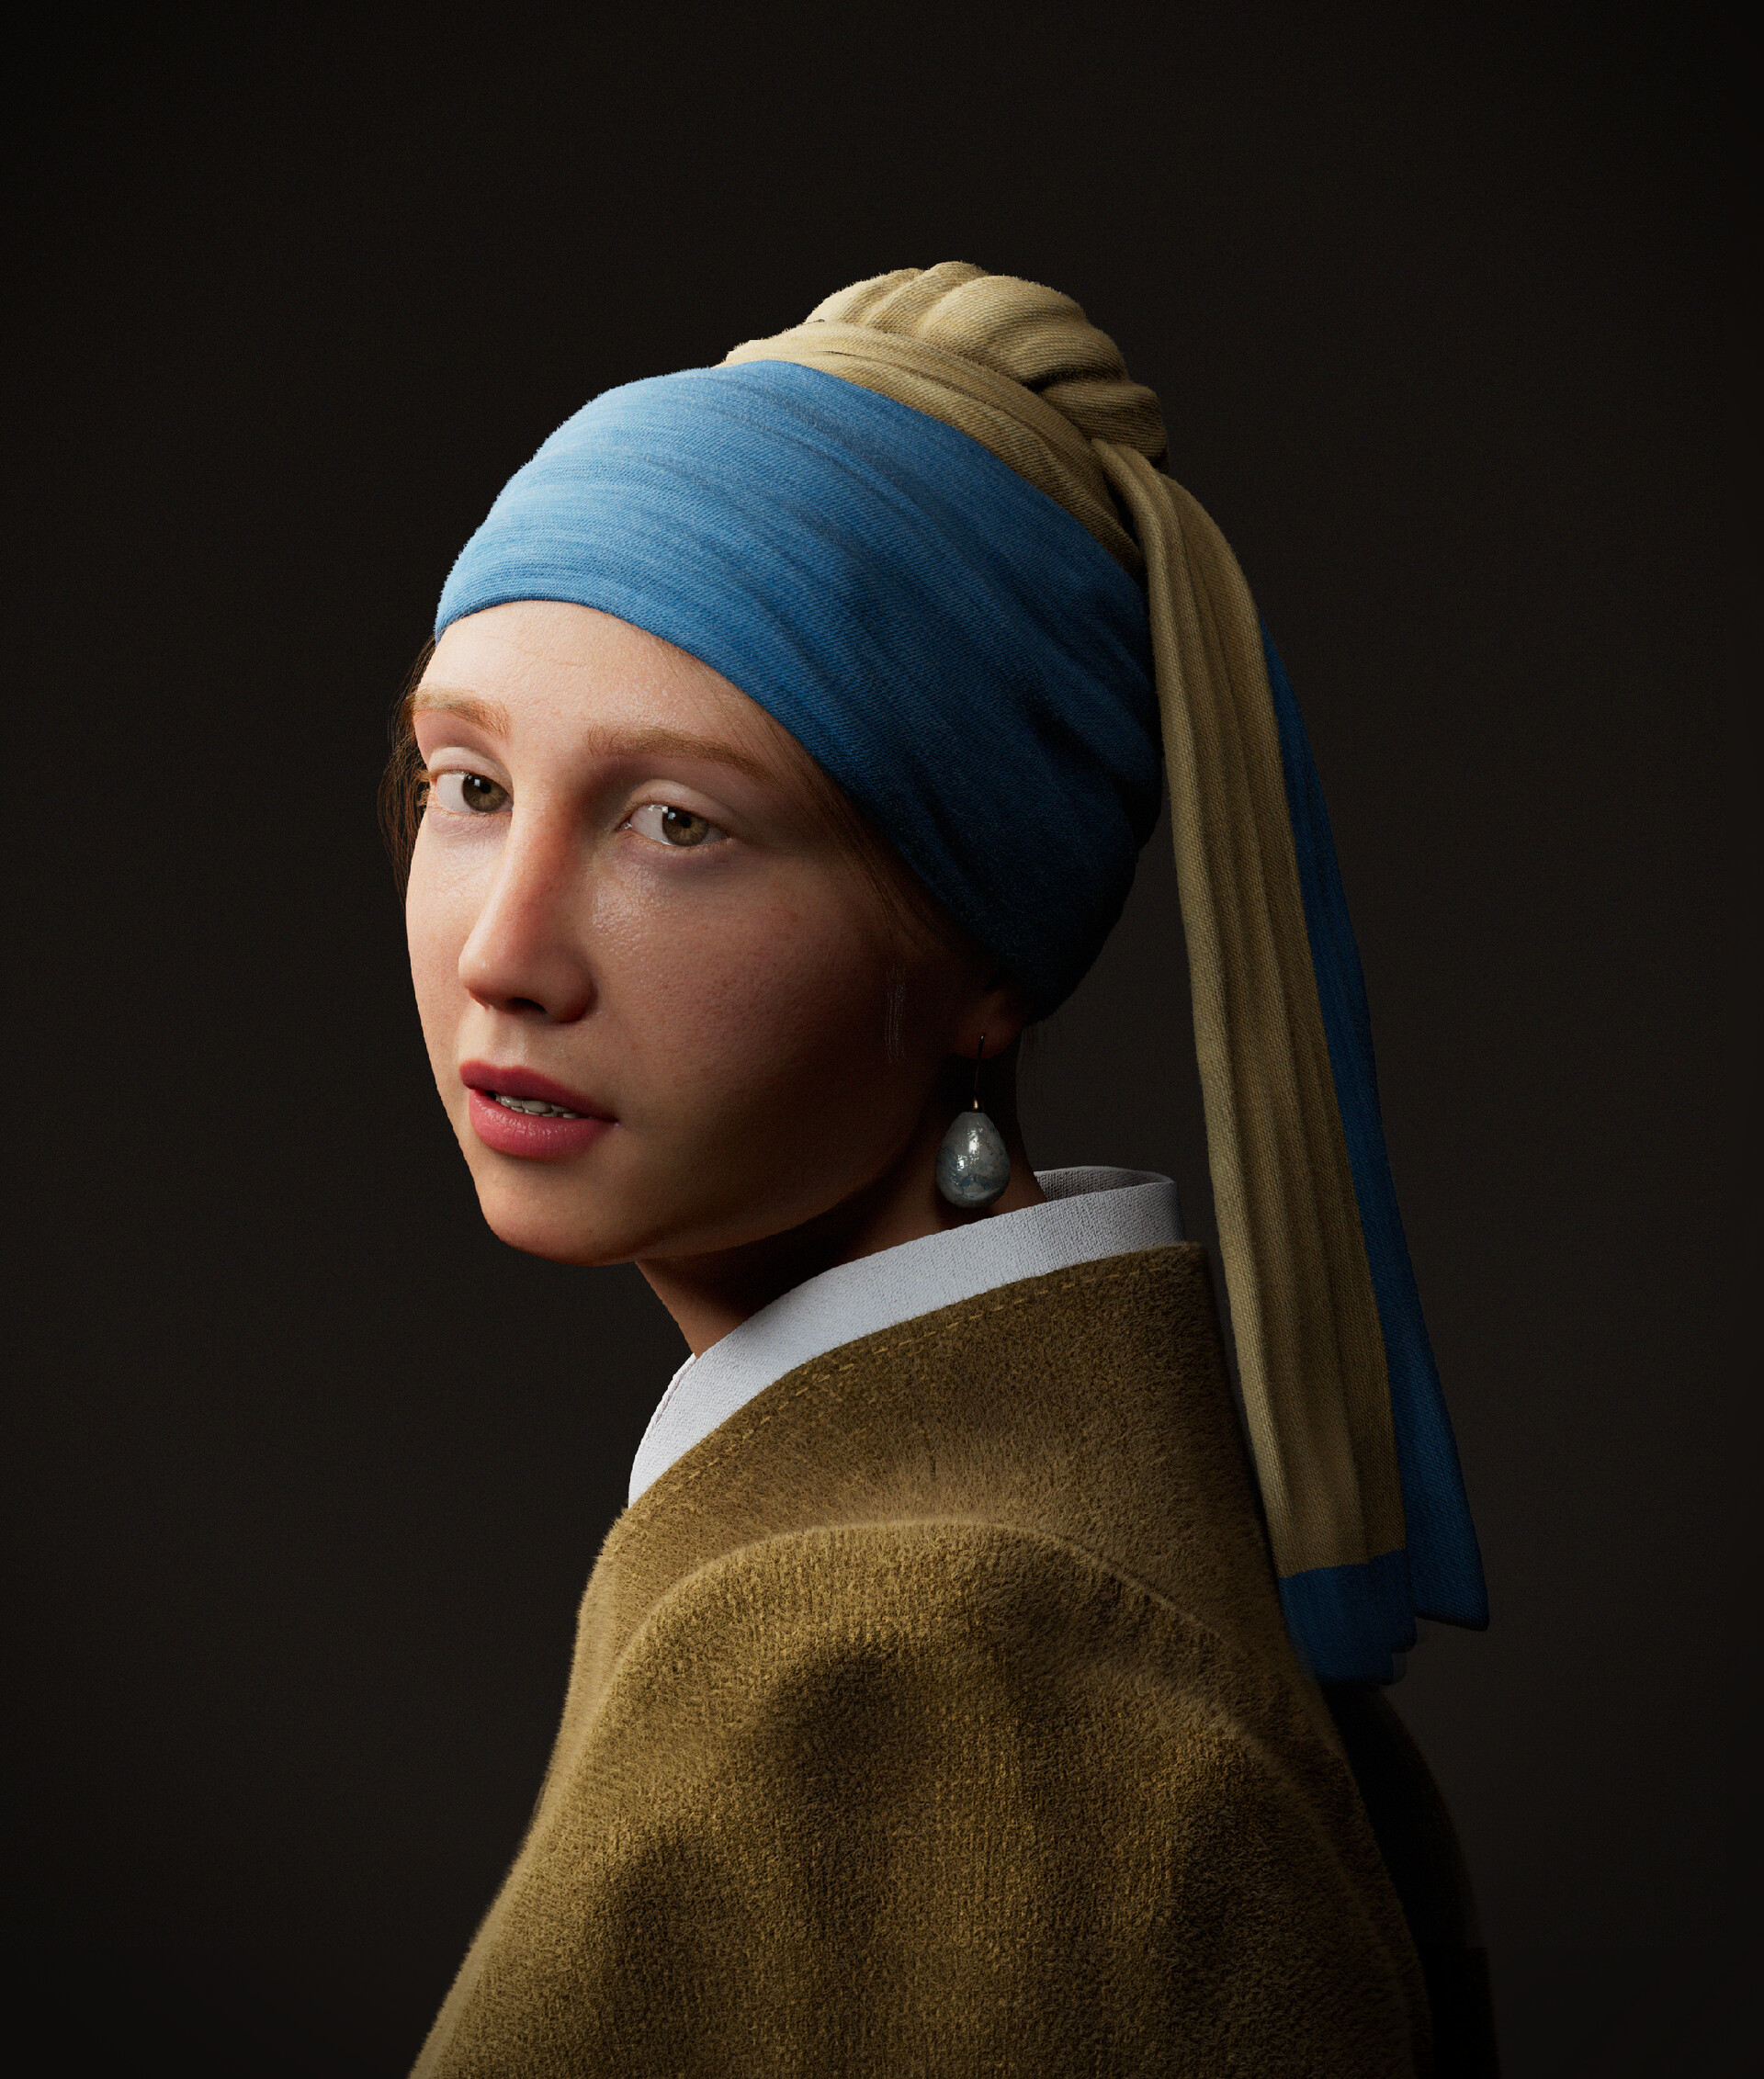 ArtStation - Girl with a Pearl Earring